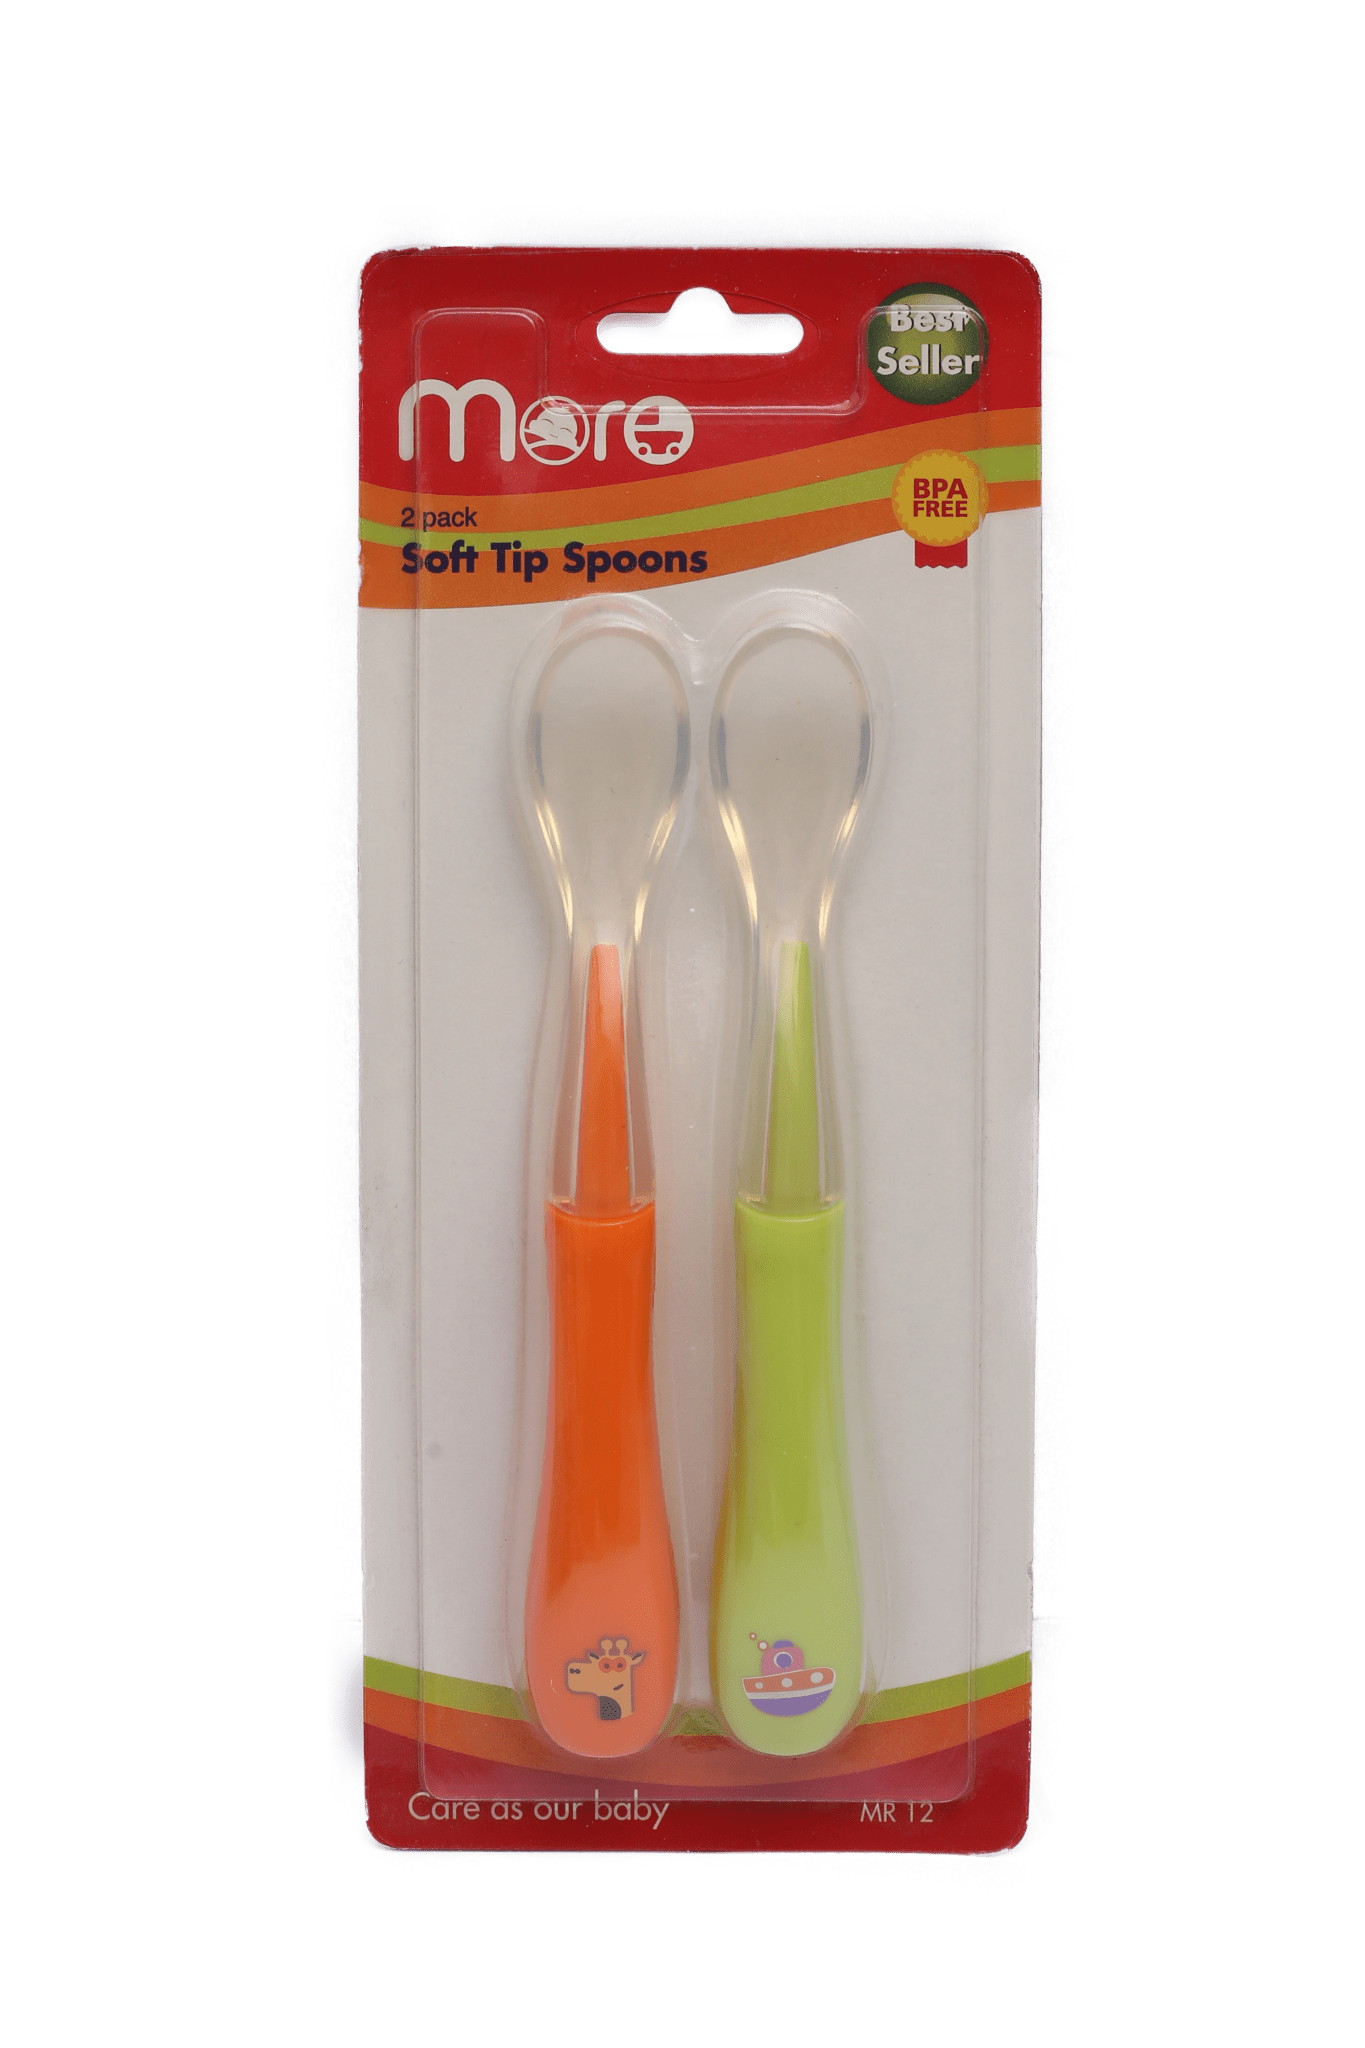 More Soft Tip Spoon ( Pack of 2 )